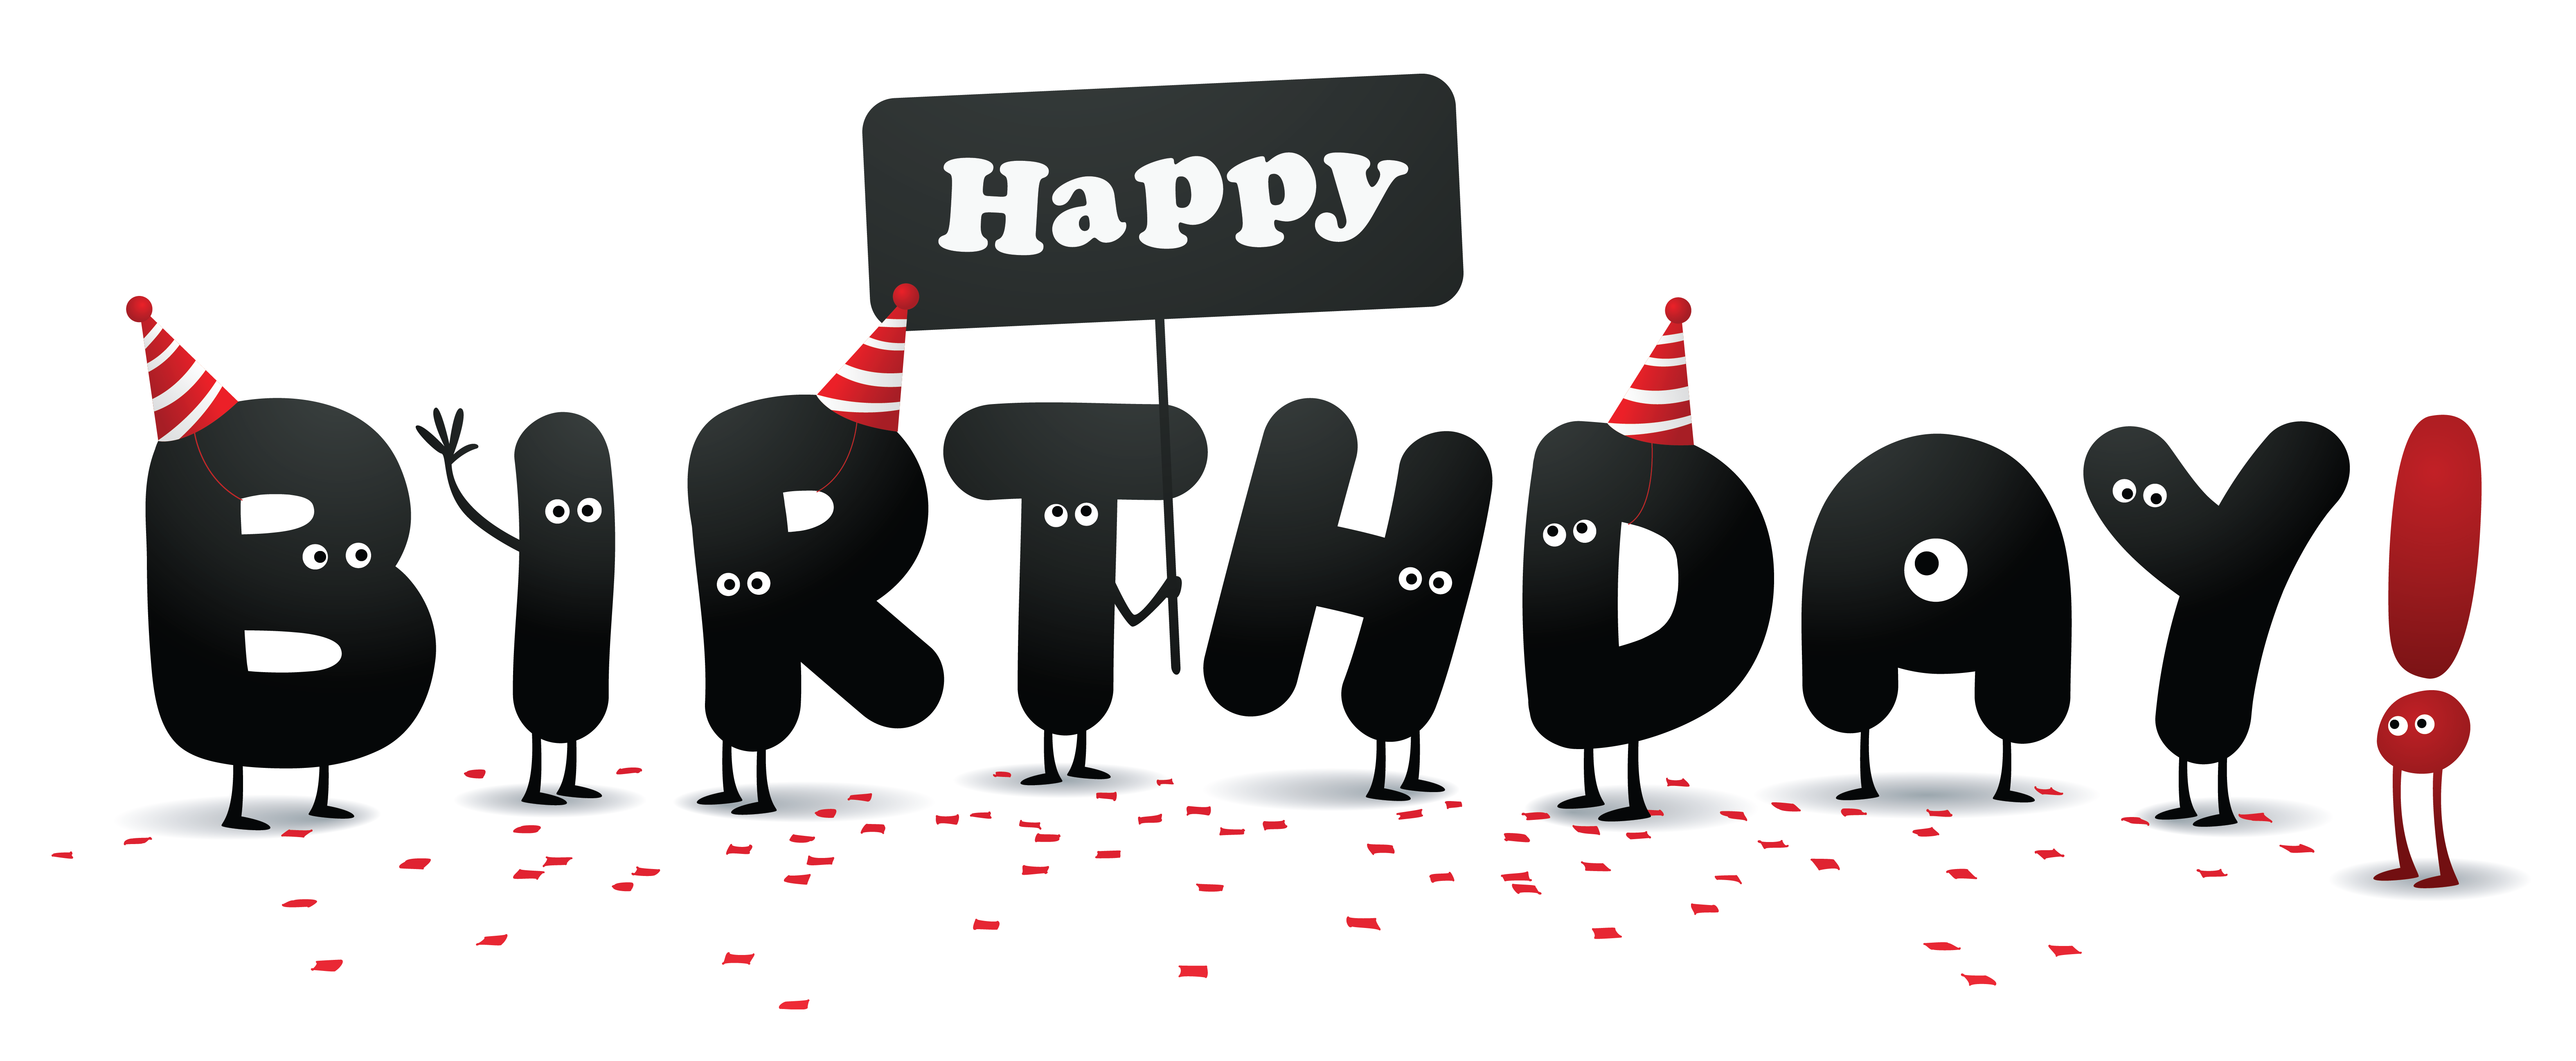 Funny birthday clipart clipart images gallery for free download.